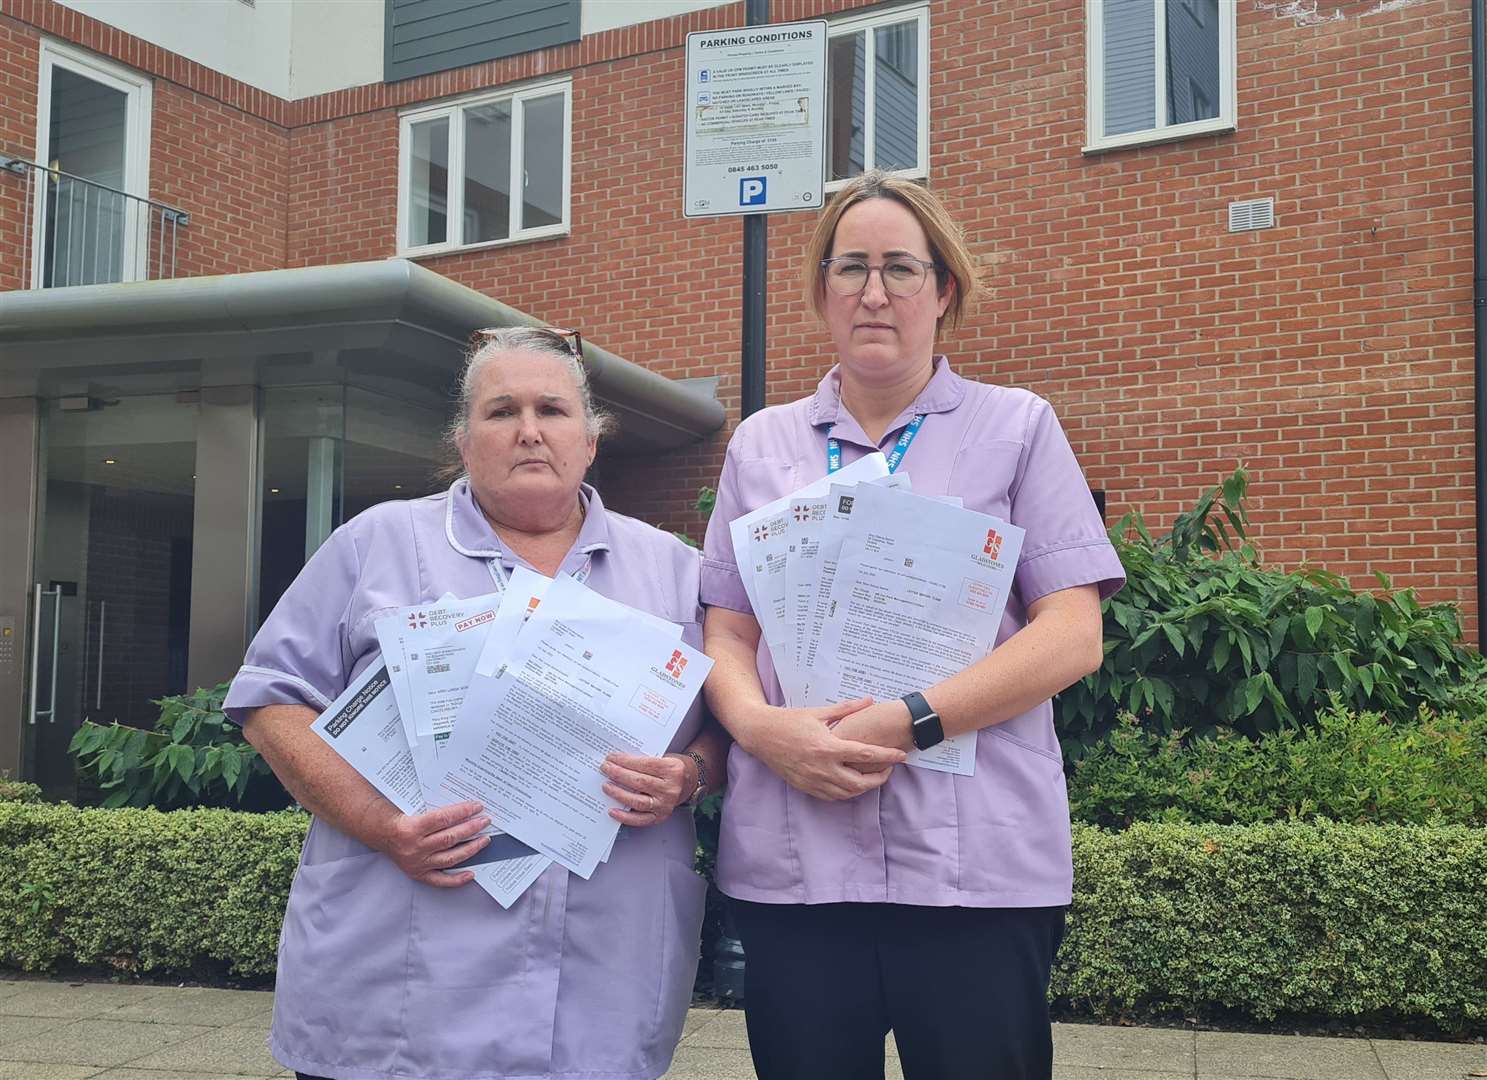 Linda Somboongedd and Stacey Batton continue to be hounded over the parking fines